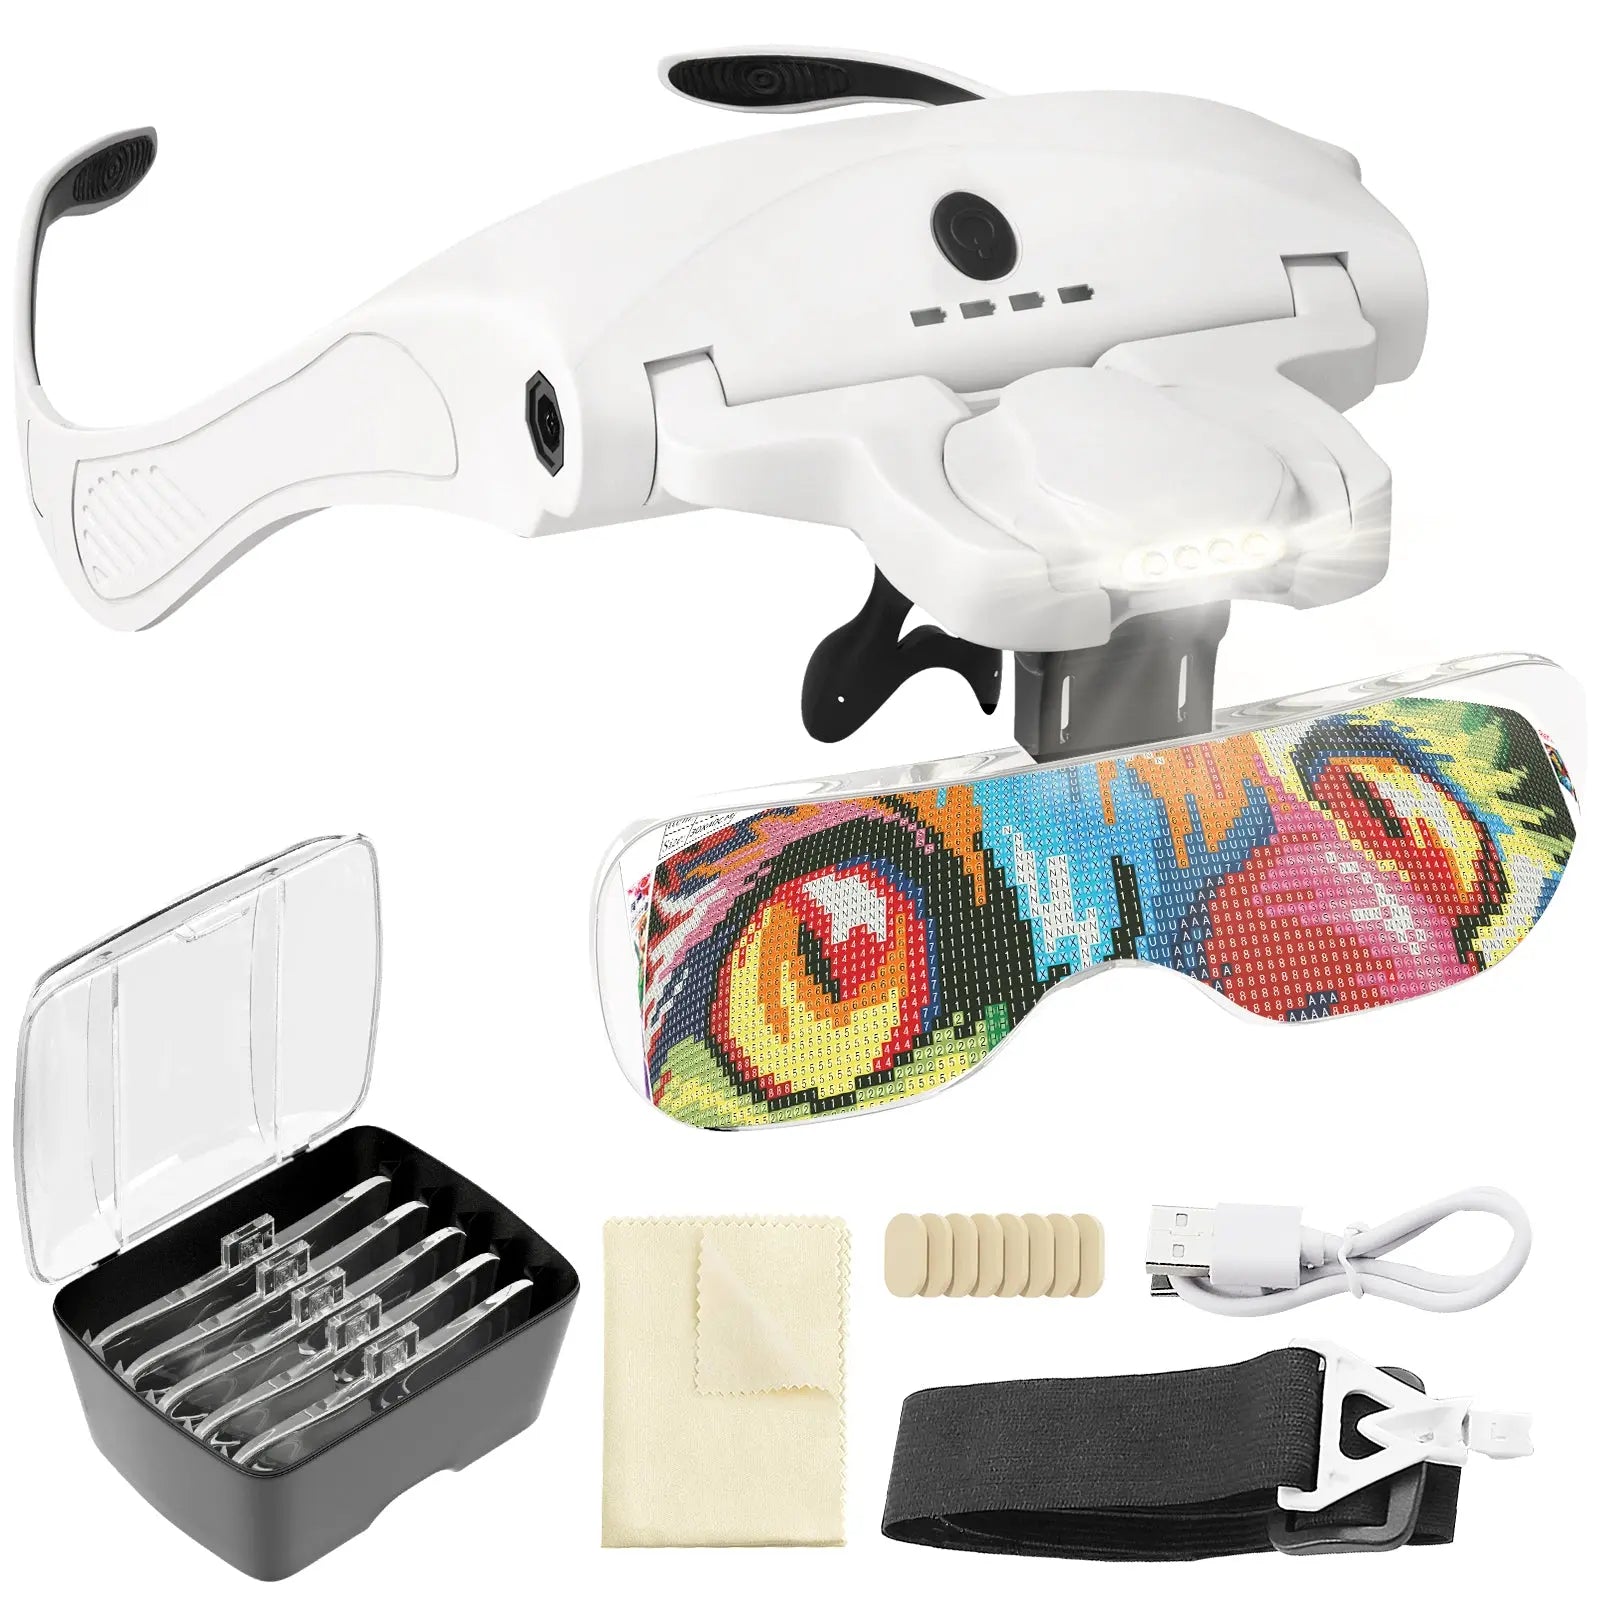 Vision Aid Magnifying Glasses with Light